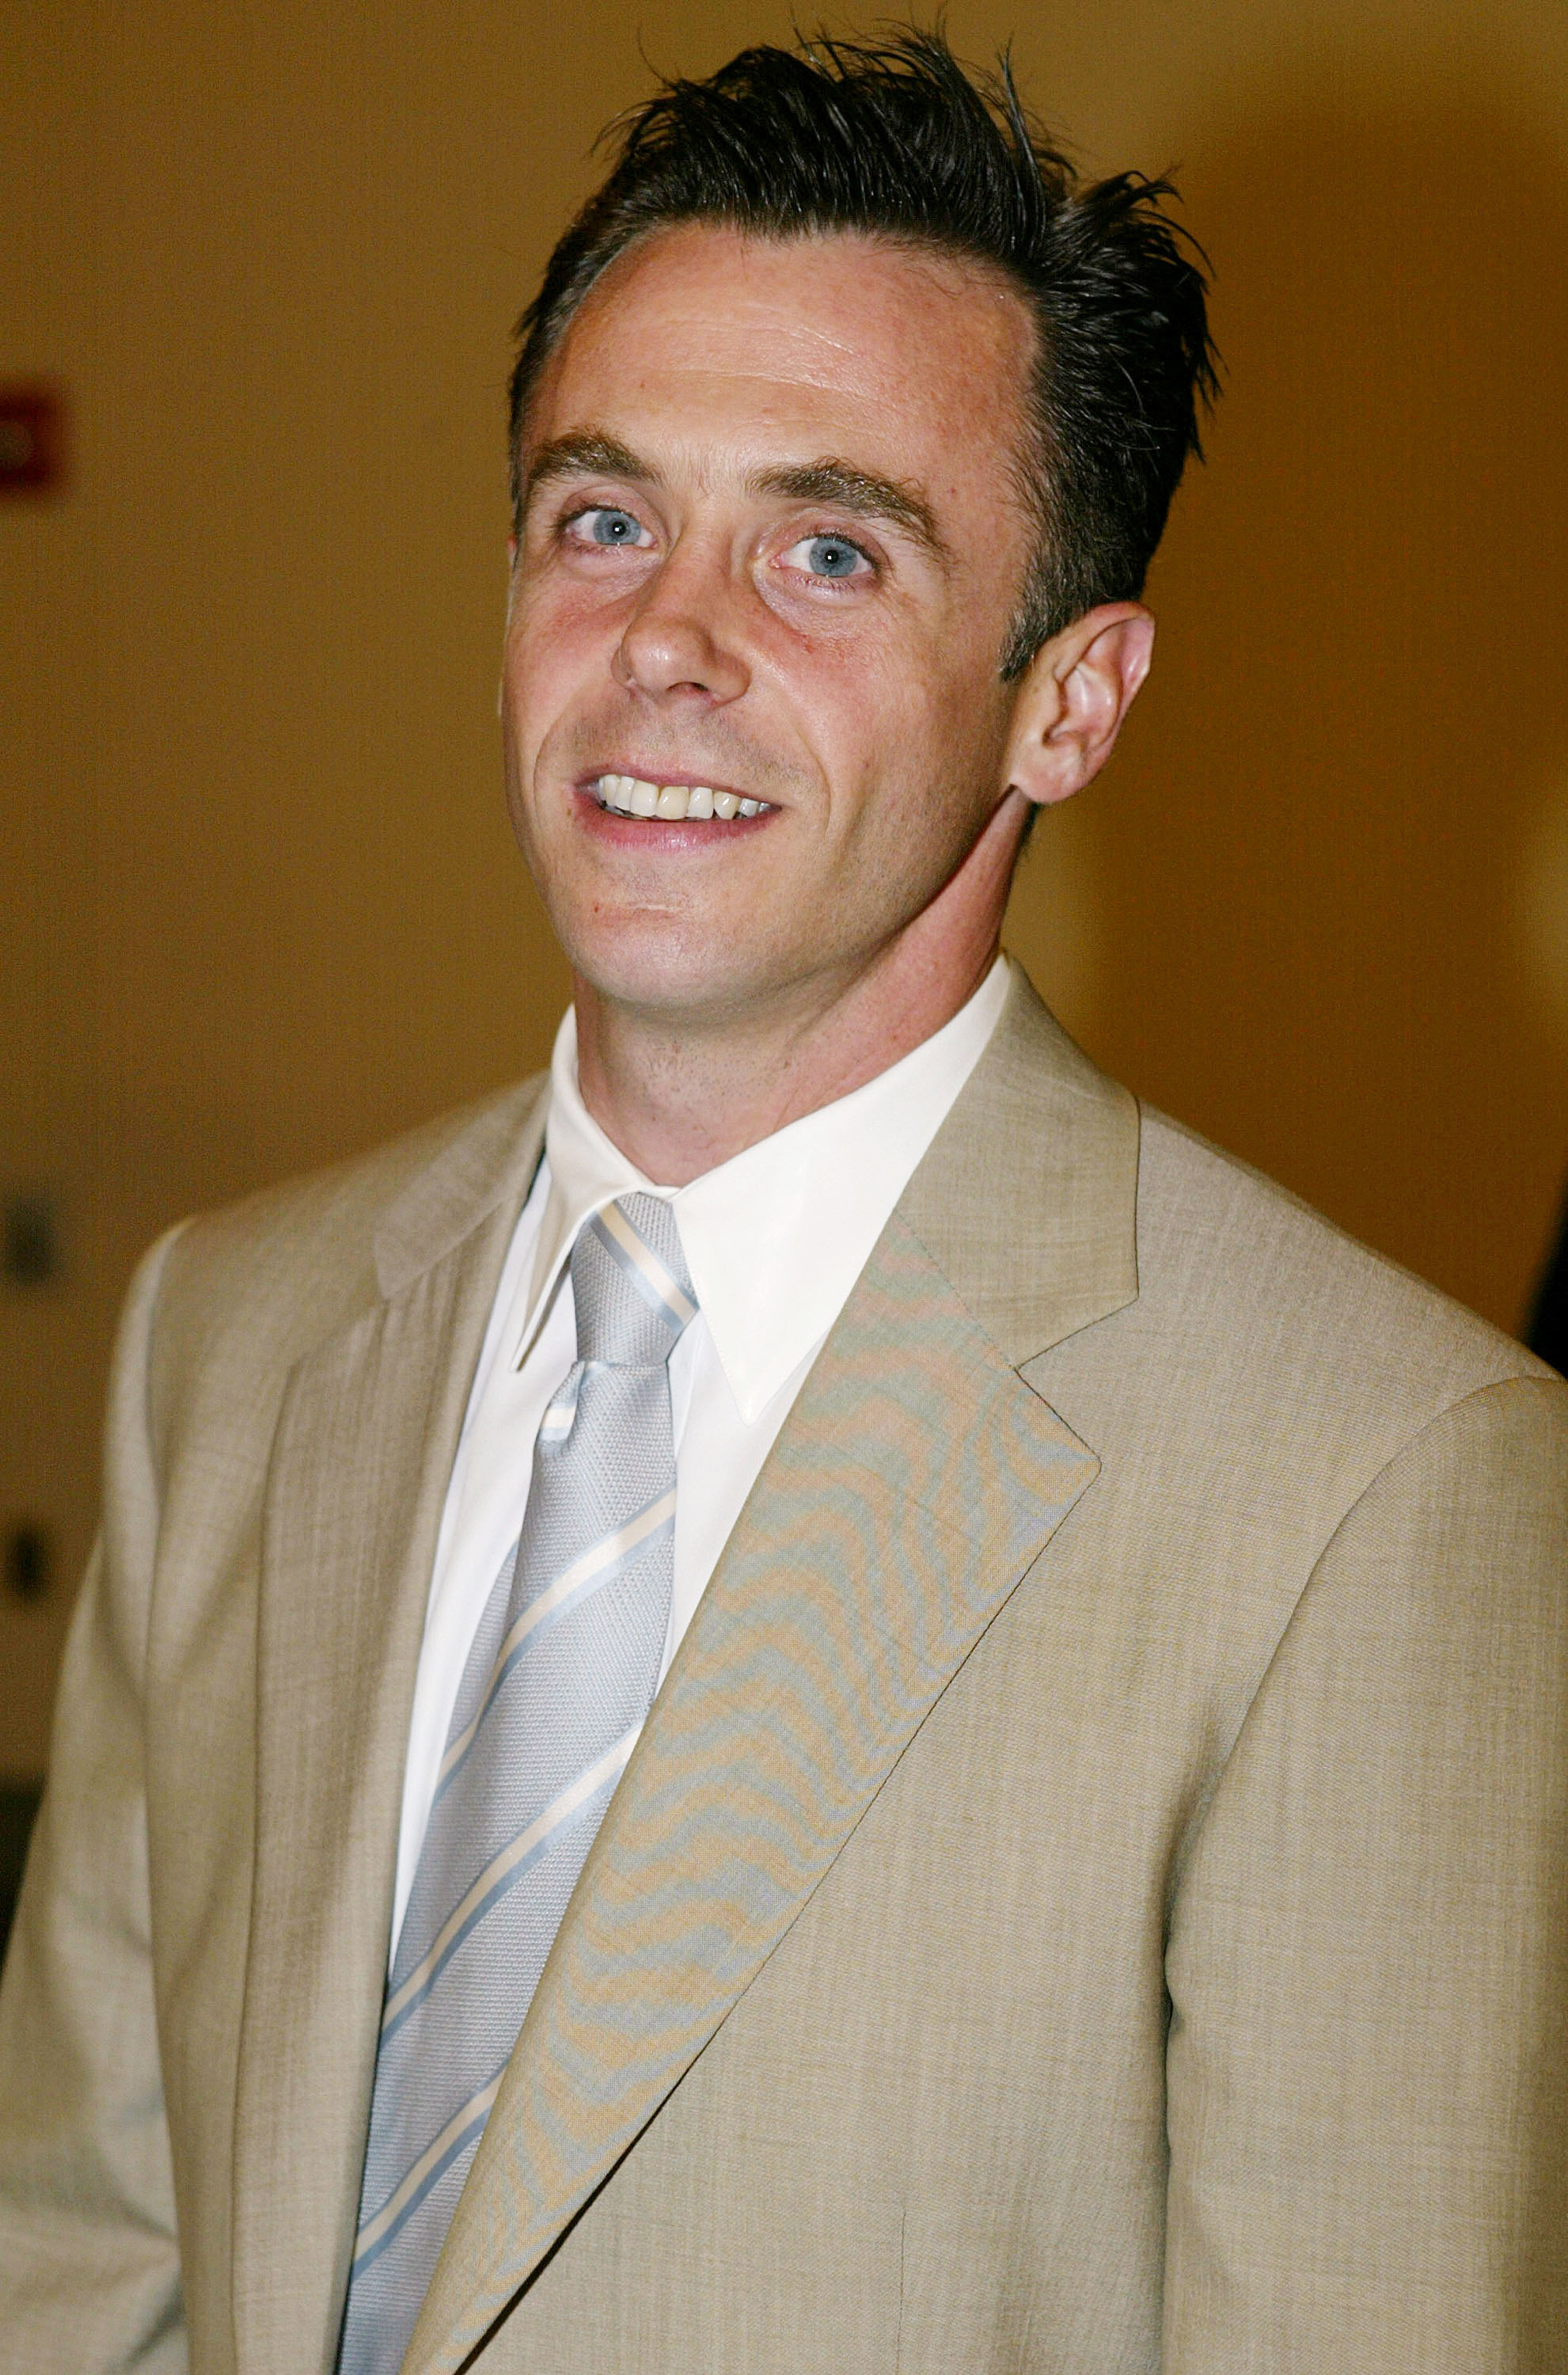 David Eigenberg attends HBO's "Sex and the City" screening party June 18, 2003 | Photo: GettyImages